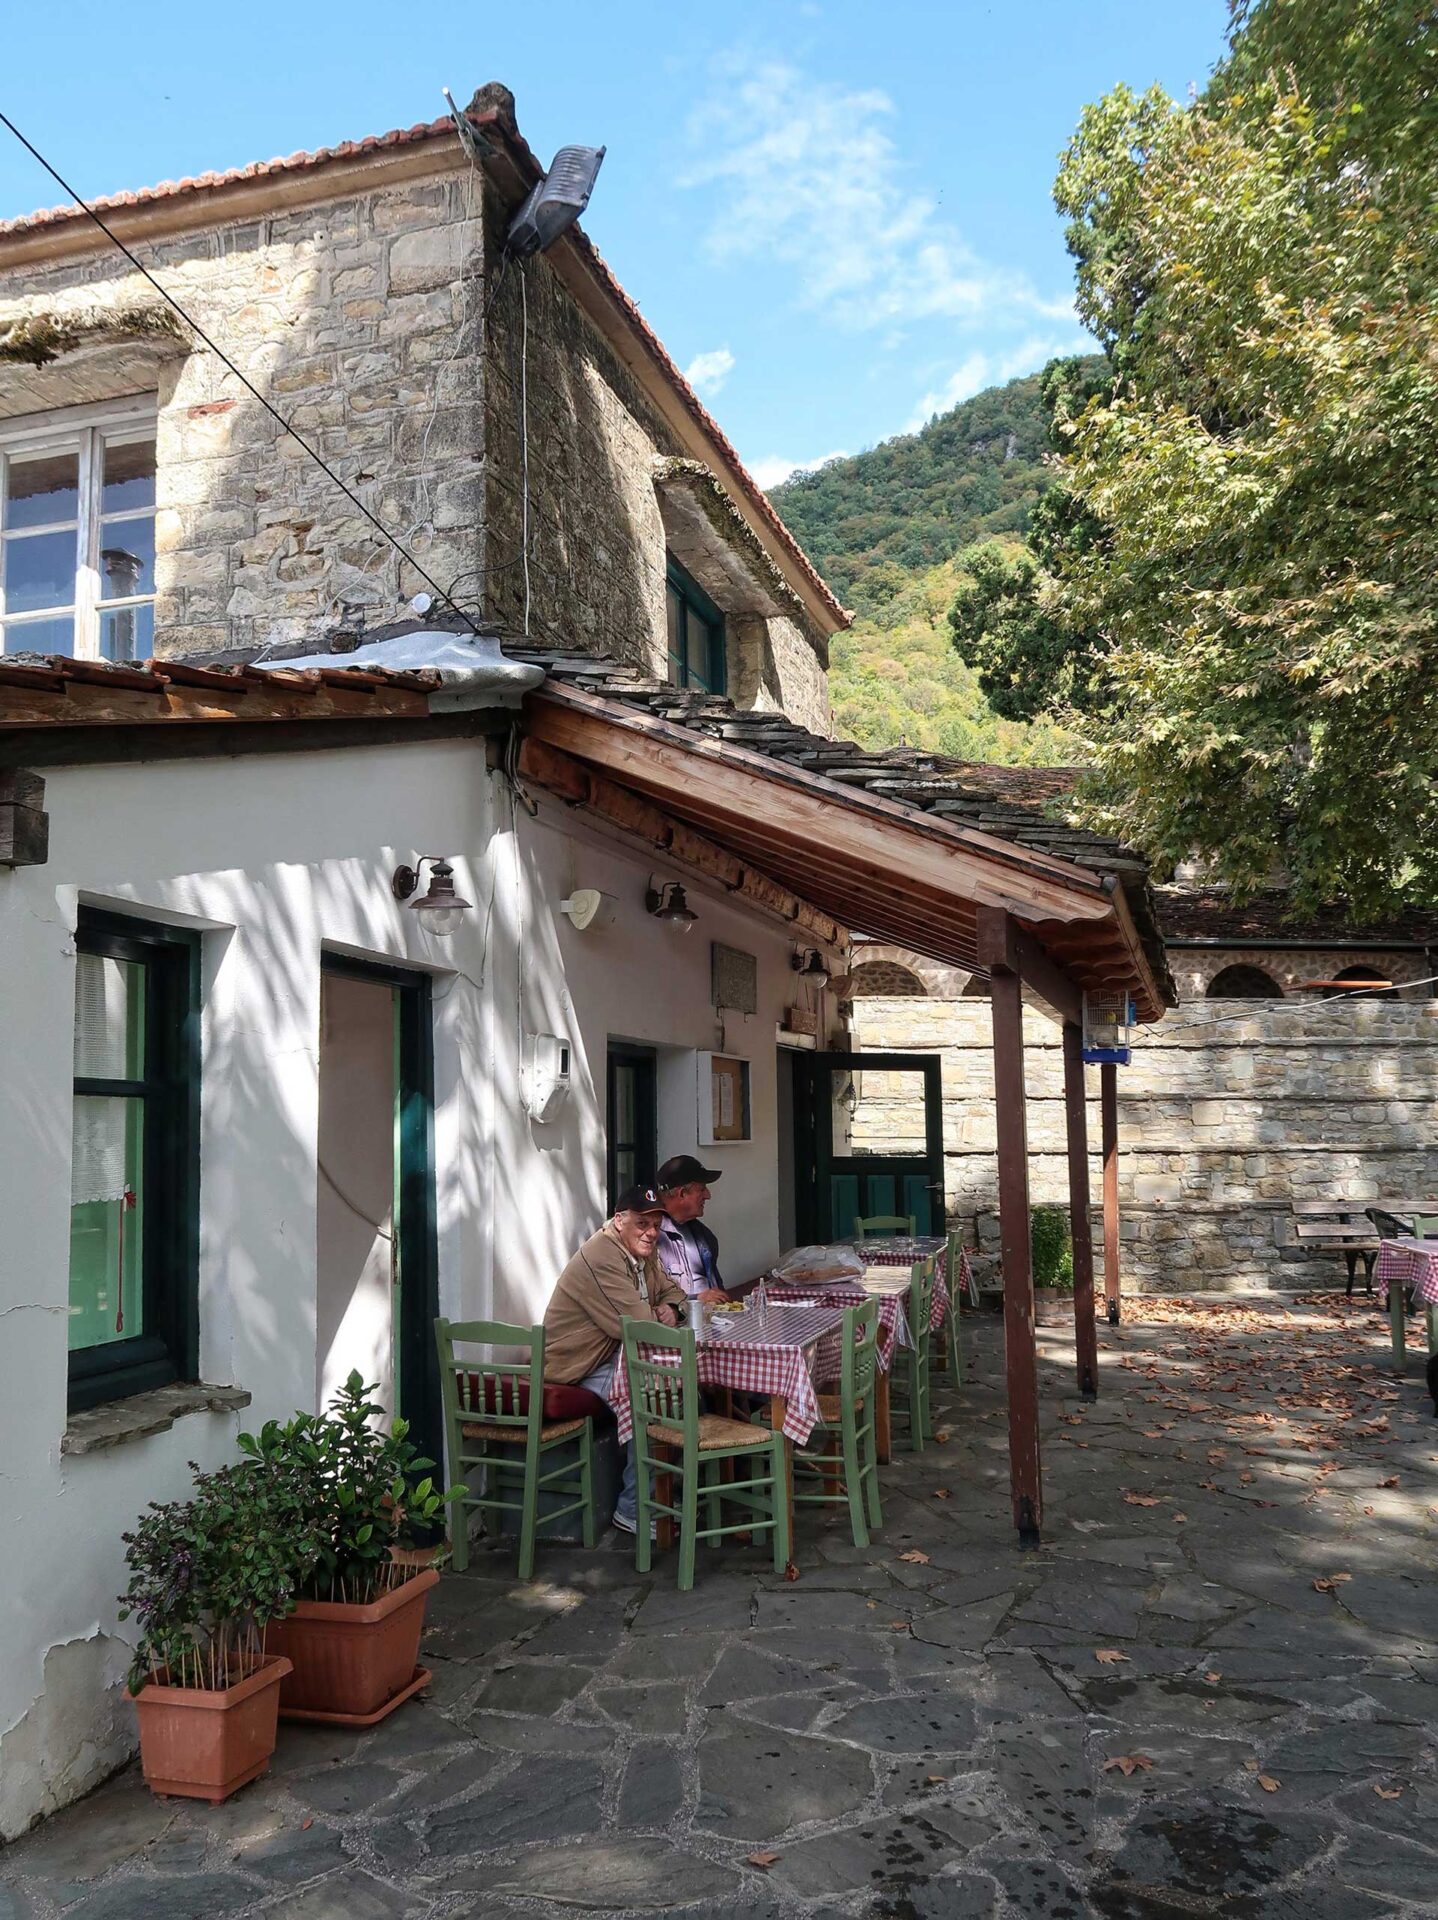 The cafe of the village